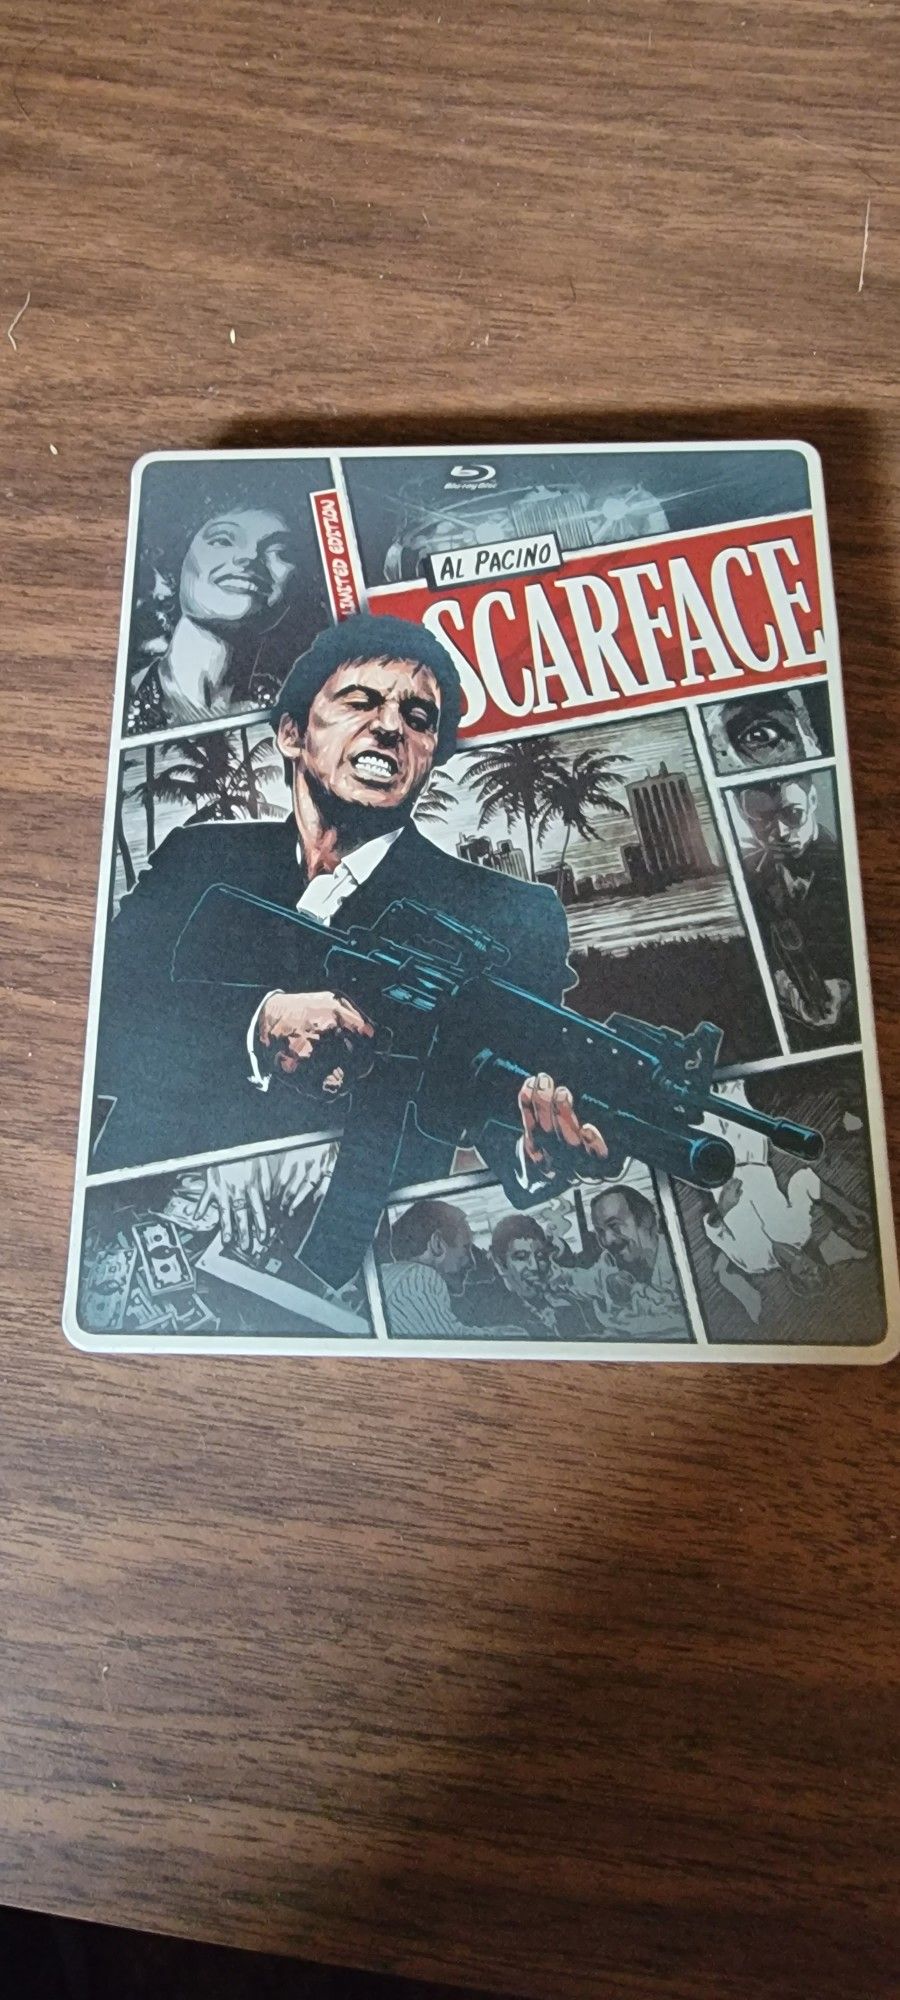 Scarface Blu Ray DVD (Limited Edition 2-disc Collectors tin)